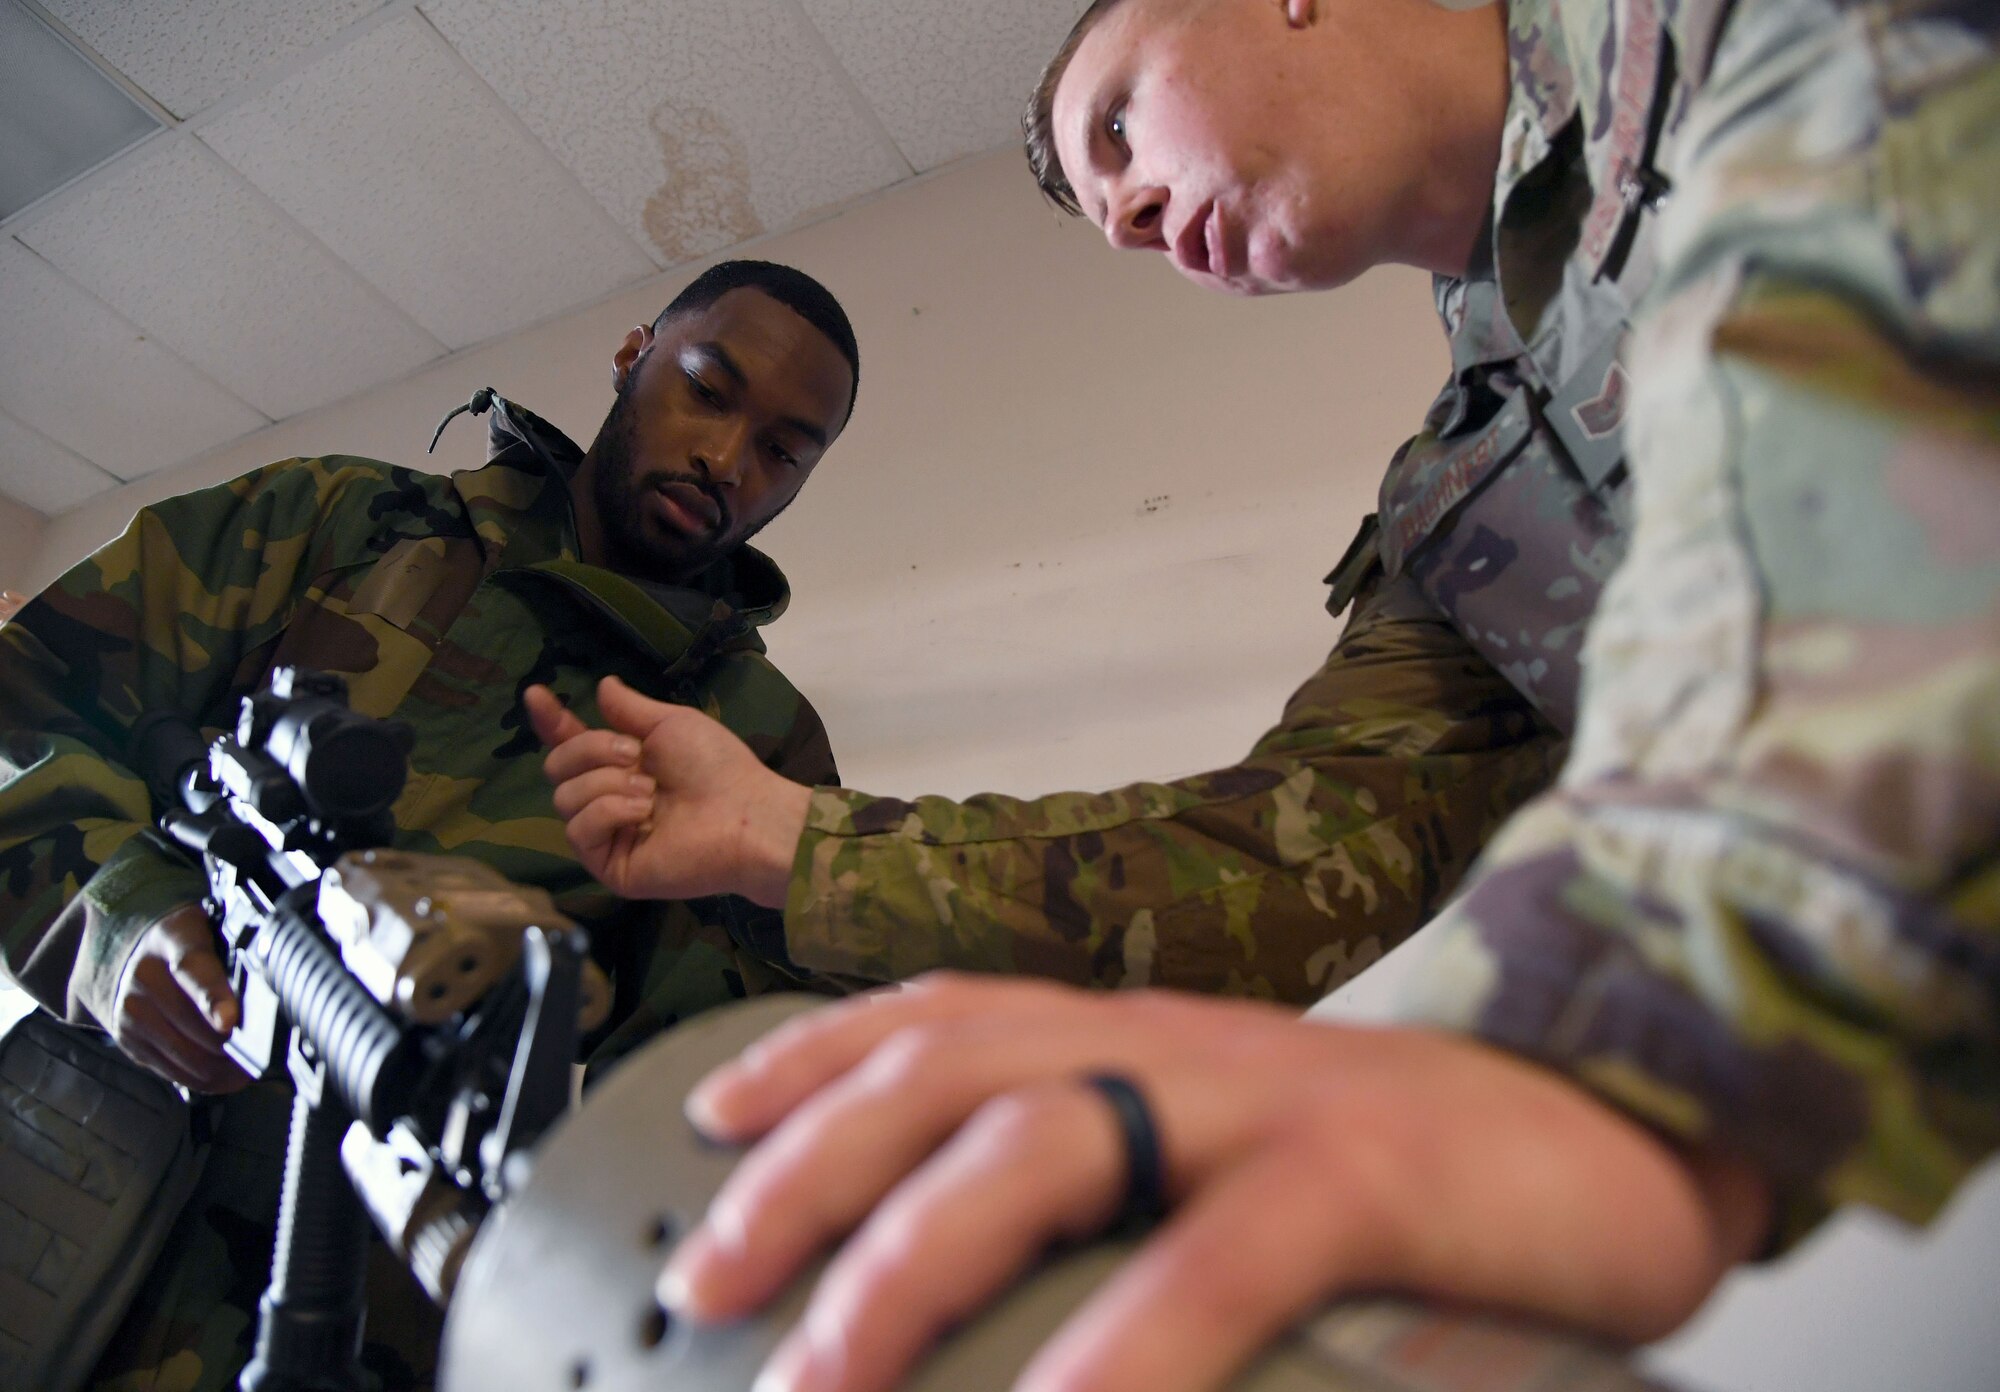 U.S. Air Force Tech. Sgt. Michael Daehnert, 81st Security Forces Squadron combat arms noncommissioned officer in charge, assists Staff Sgt. Chardarius Alex, Second Air Force command support staff technician, with weapons handling assessment during a small scale readiness assessment at Keesler Air Force Base, Mississippi, May 18, 2022. The assessment allowed Keesler personnel to be evaluated on their basic life saving skills in preparation of real-world events. (U.S. Air Force photo by Kemberly Groue)